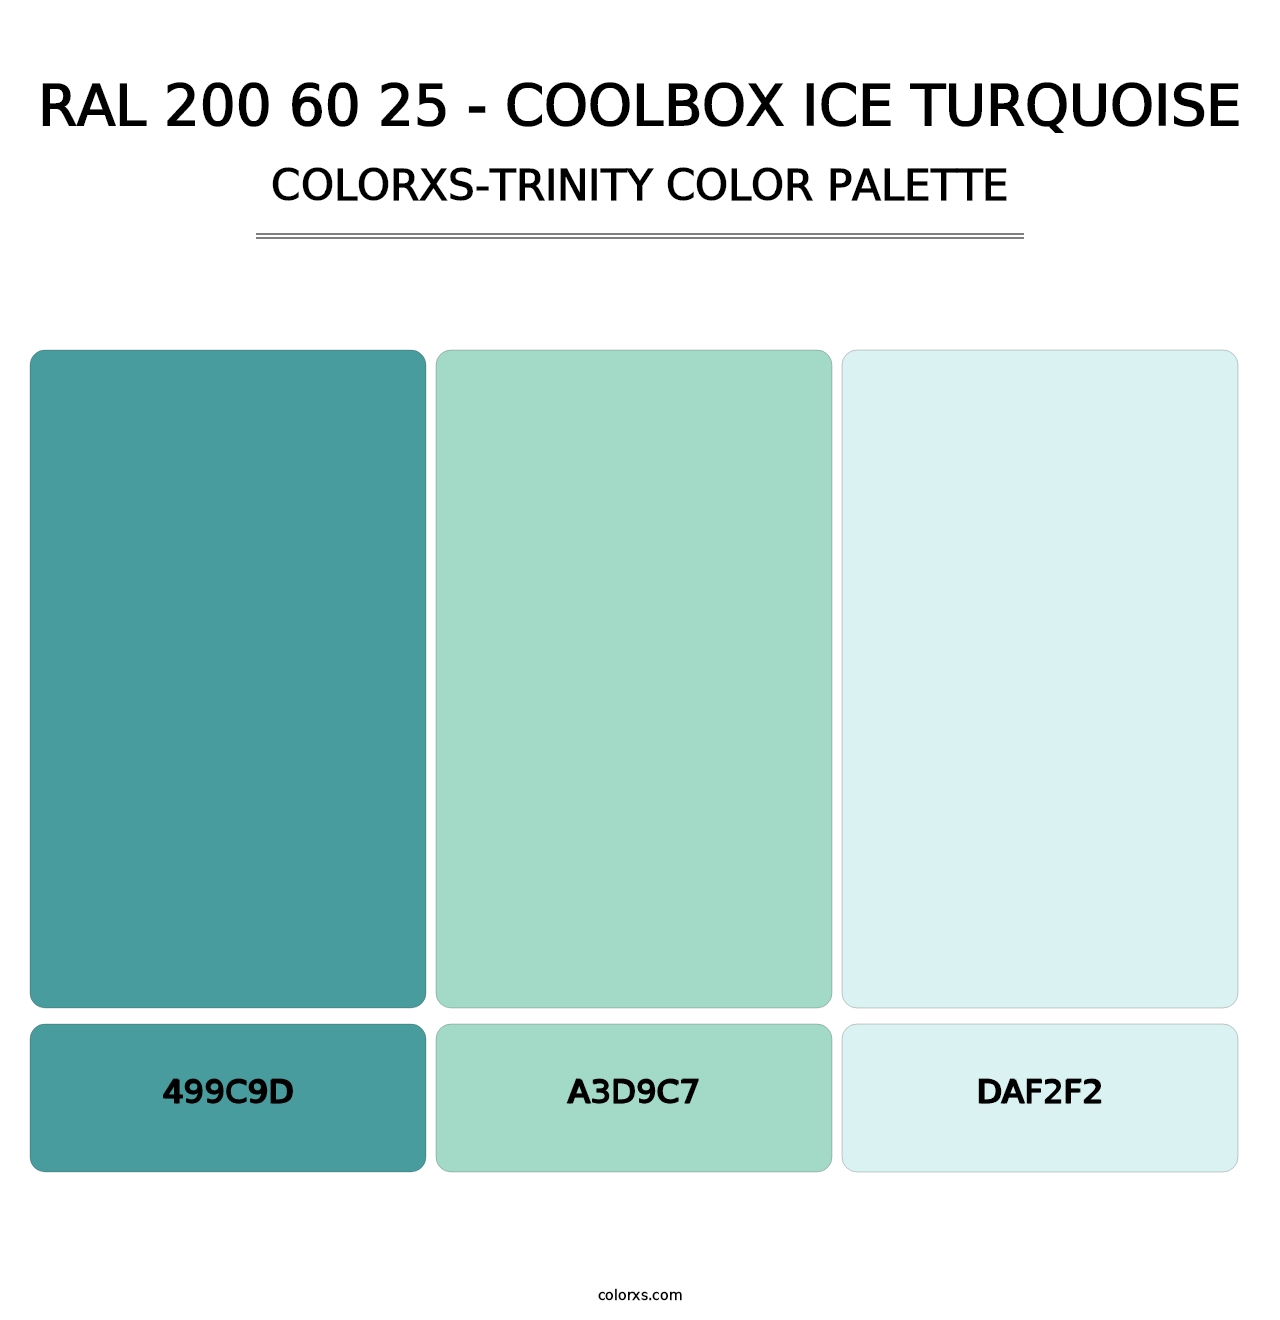 RAL 200 60 25 - Coolbox Ice Turquoise - Colorxs Trinity Palette